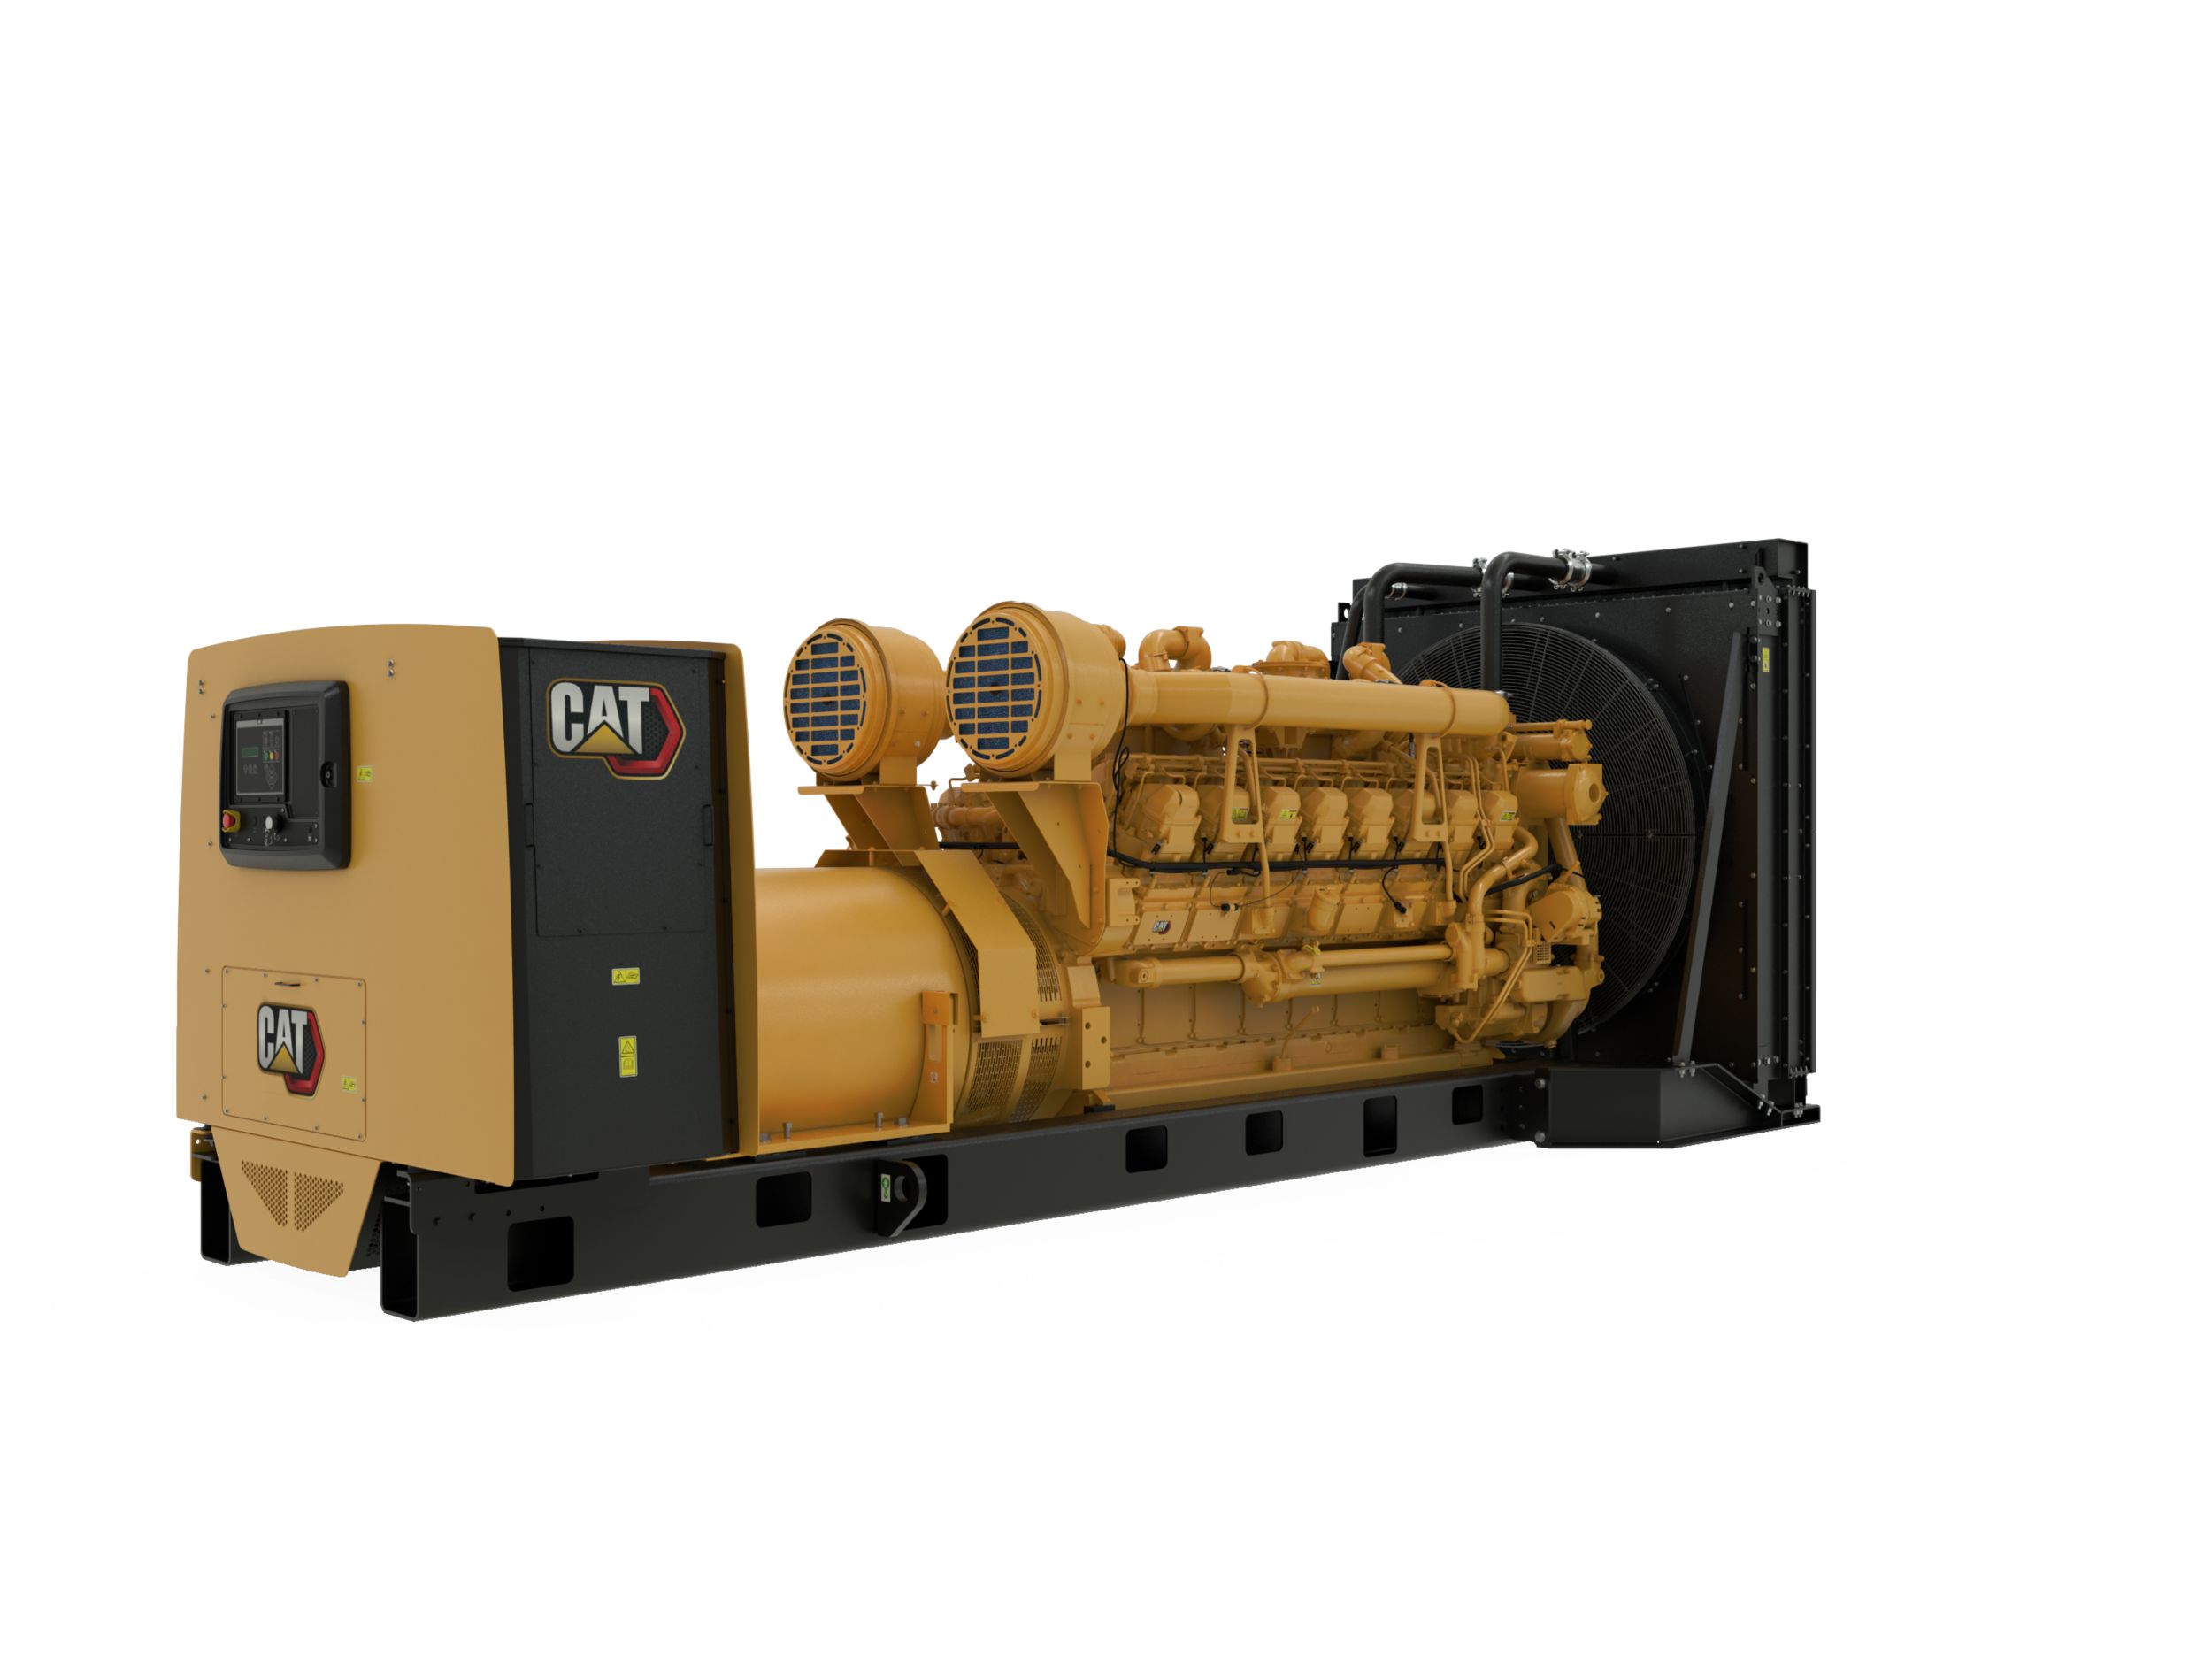 3516B (50 Hz) 2500 kVA with Upgradeable Package